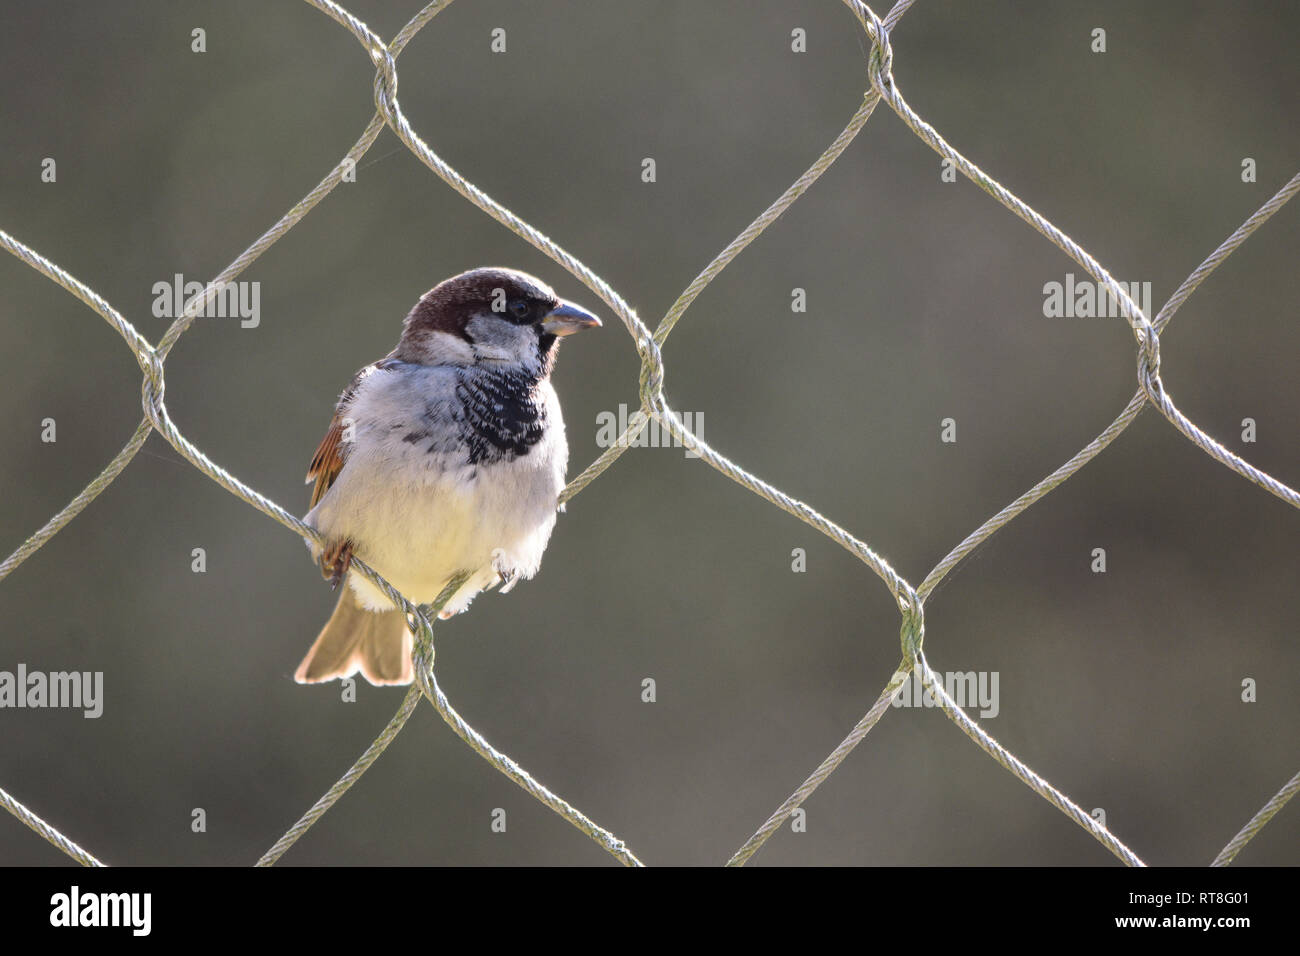 A Sparrow Perched in the Loop of a Tall Wire Fence - a free spirit concept as the bird is small enough to be able to move freely through the barrier Stock Photo